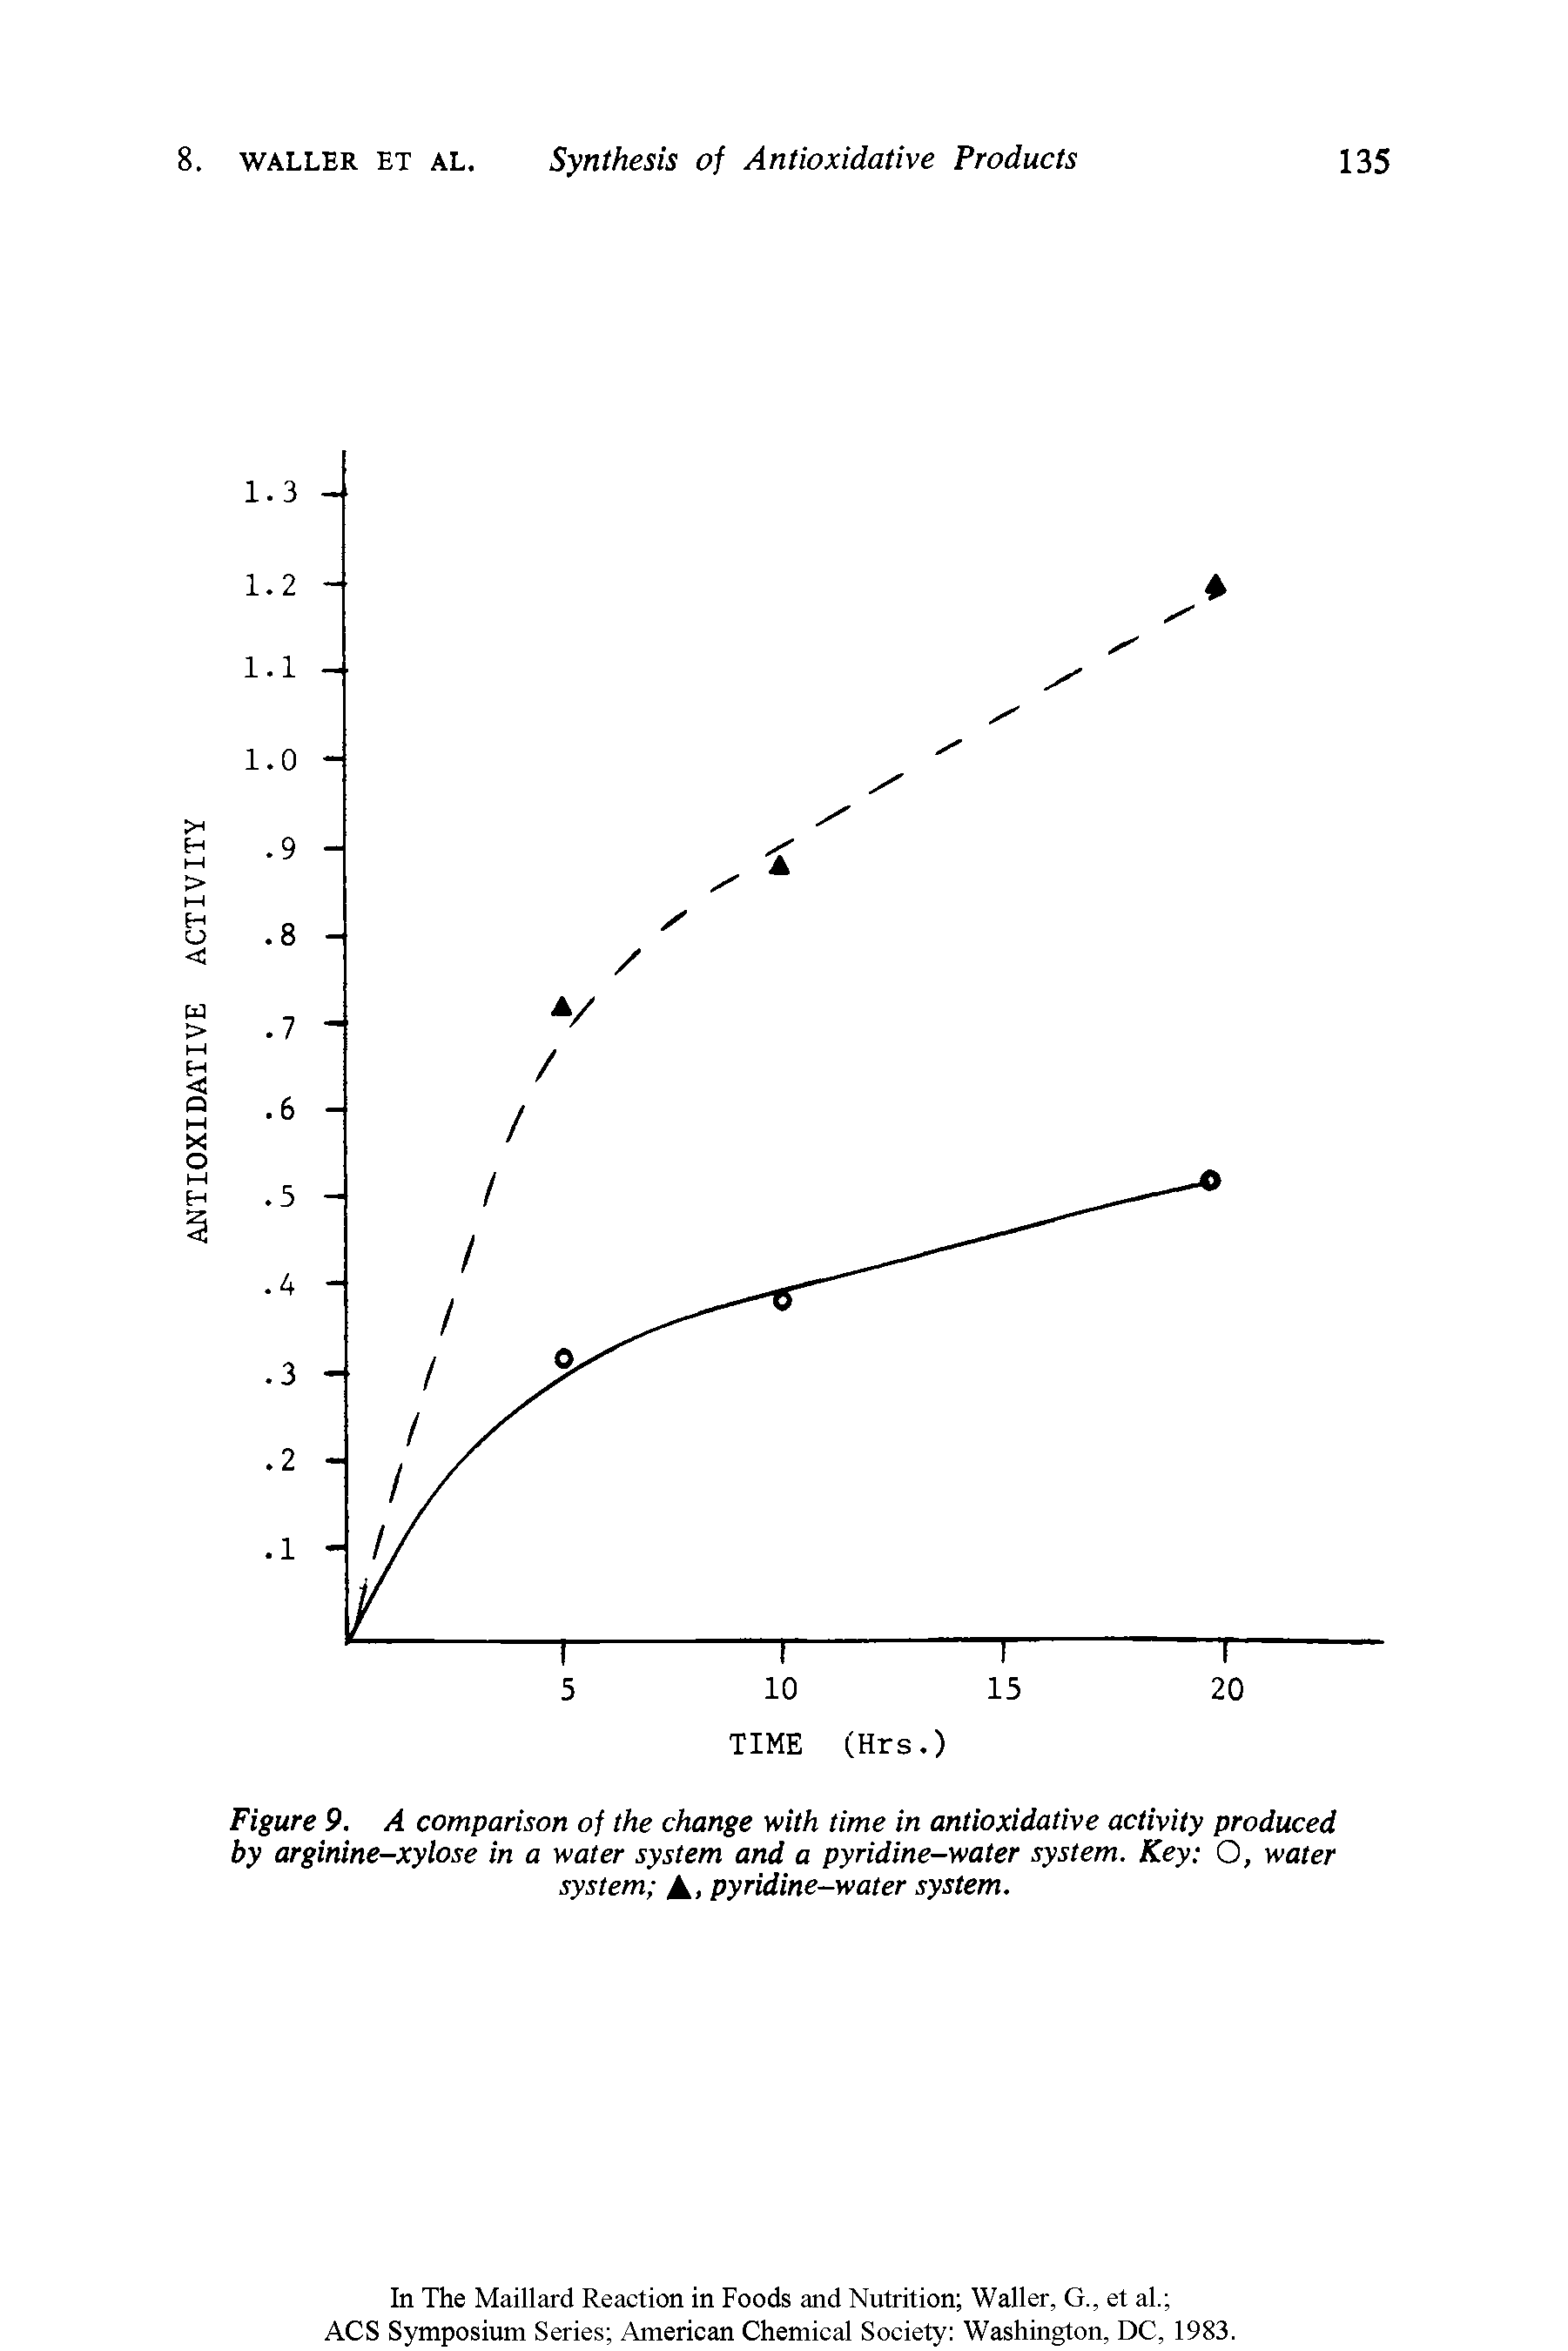 Figure 9. A comparison of the change with time in antioxidative activity produced by arginine-xylose in a water system and a pyridine-water system. Key O, water system pyridine—water system.